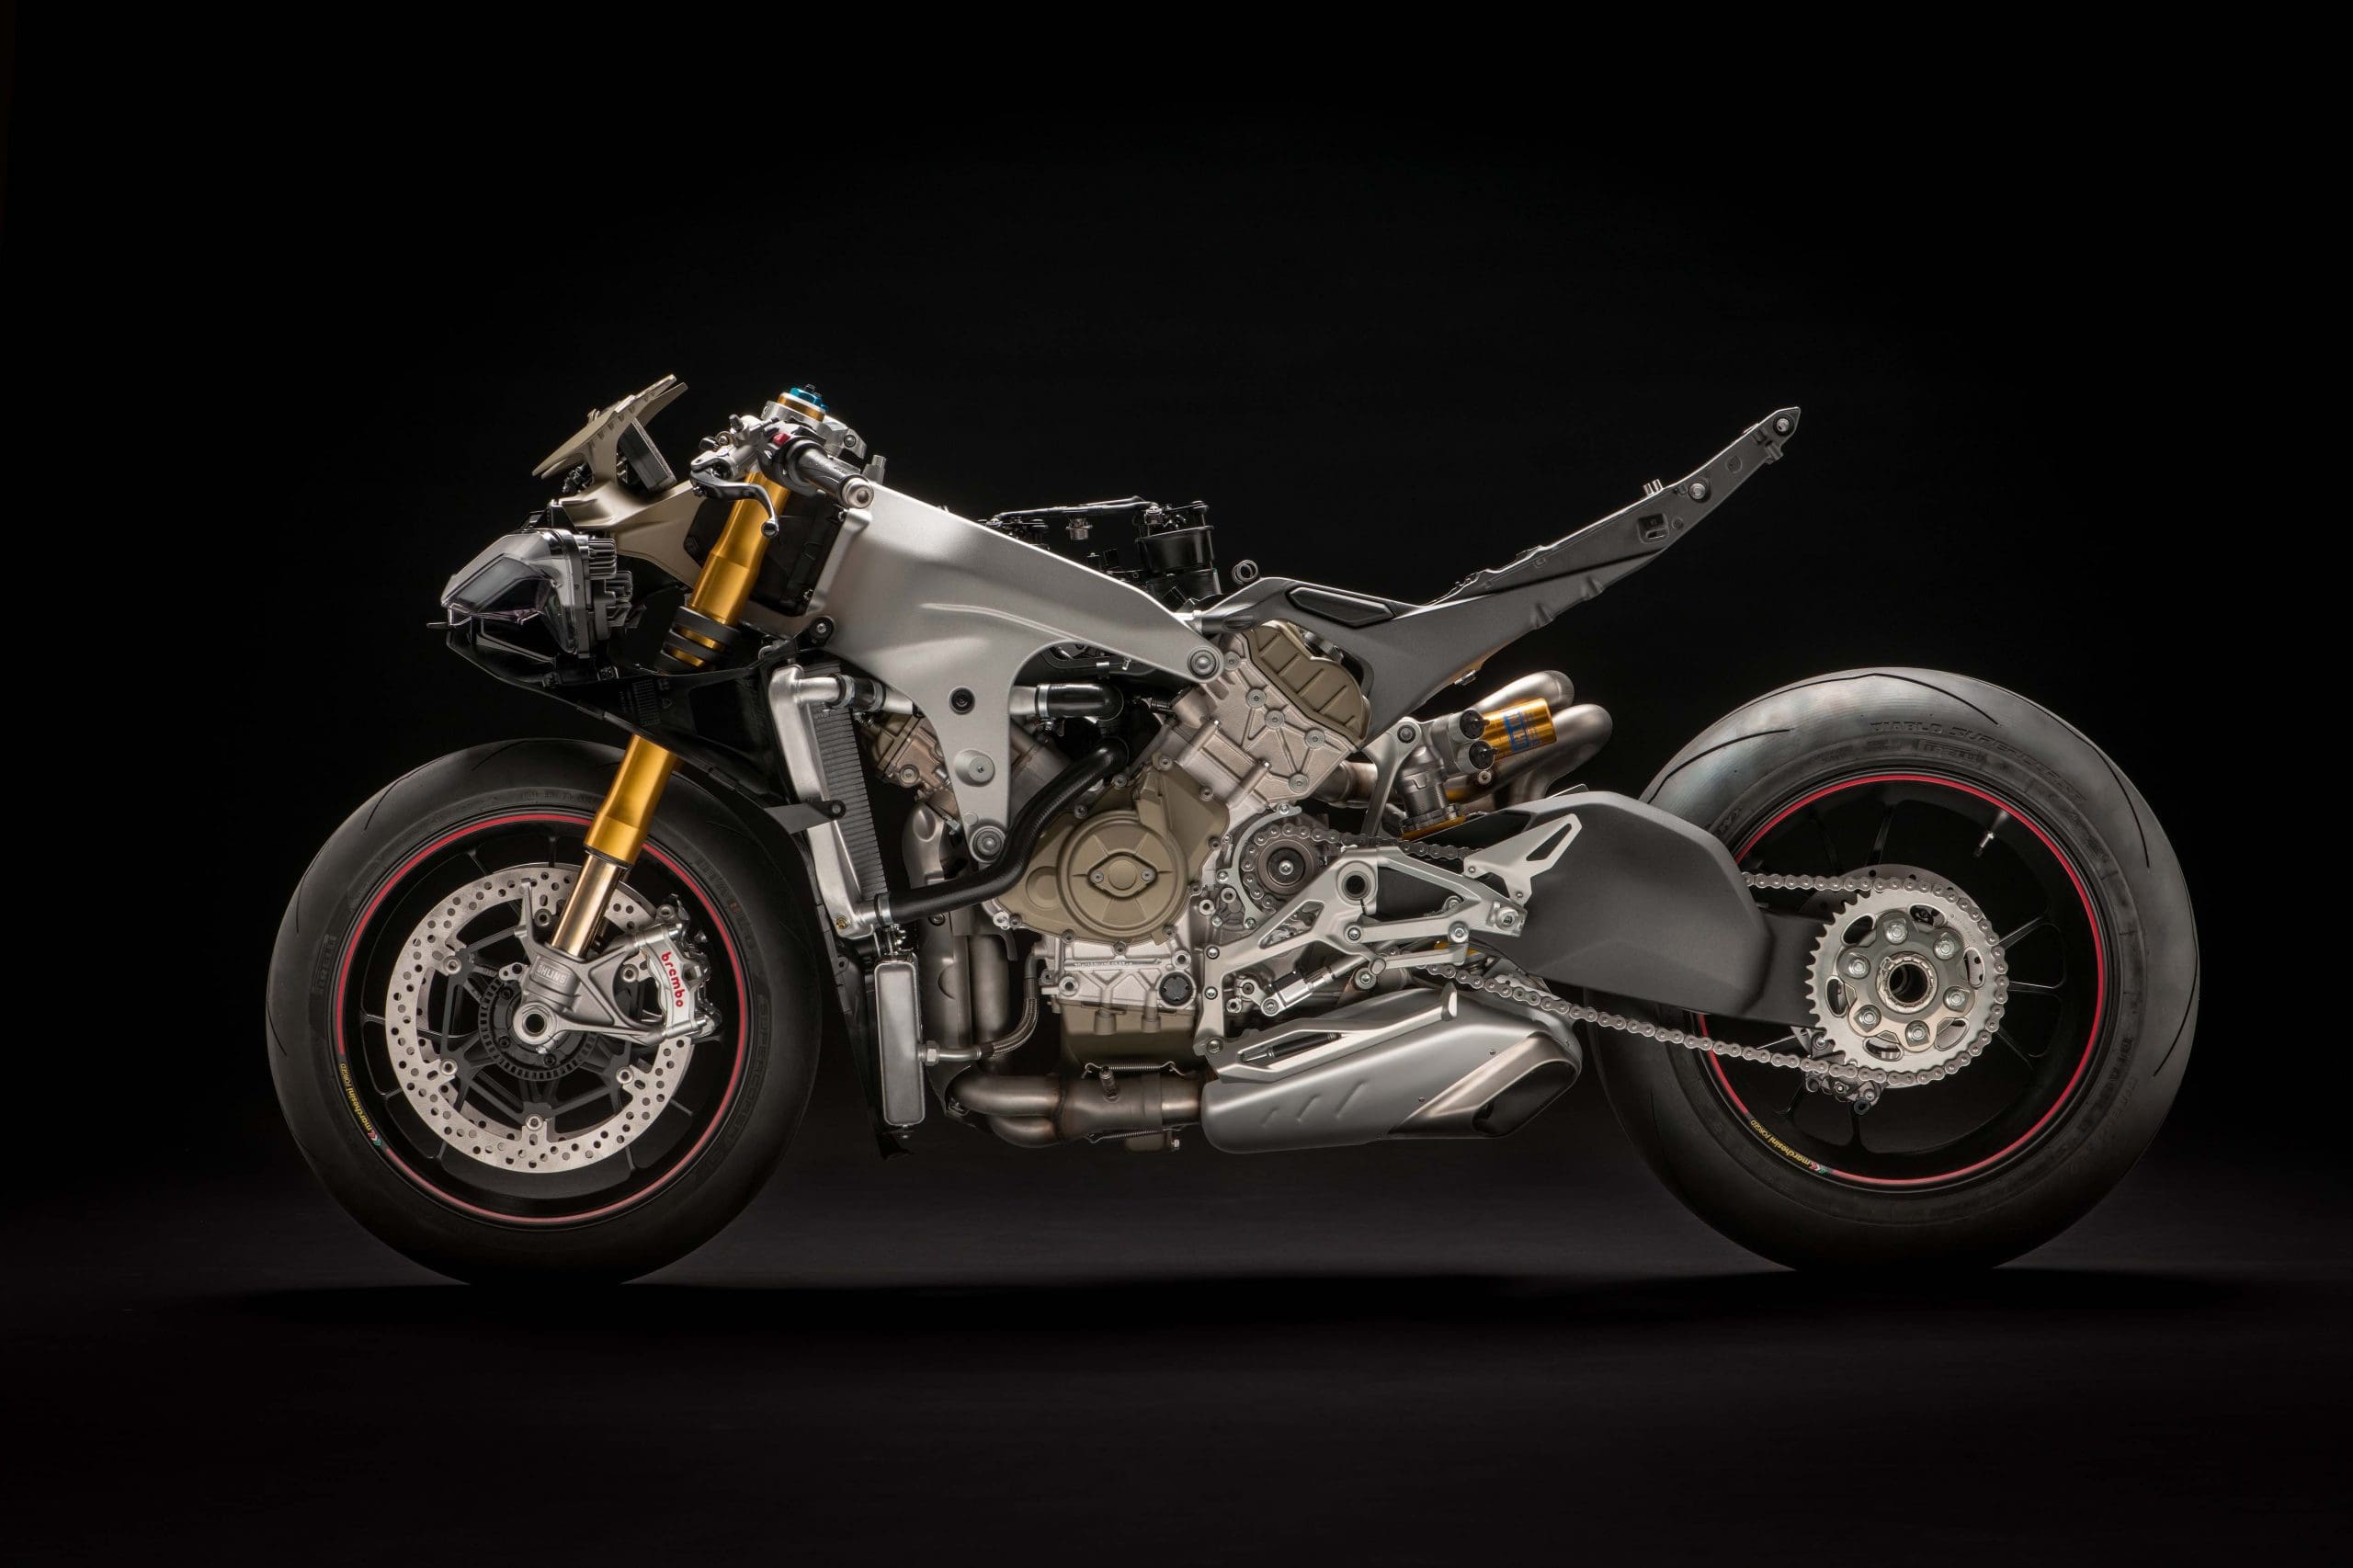 Panigale chassis on a black background